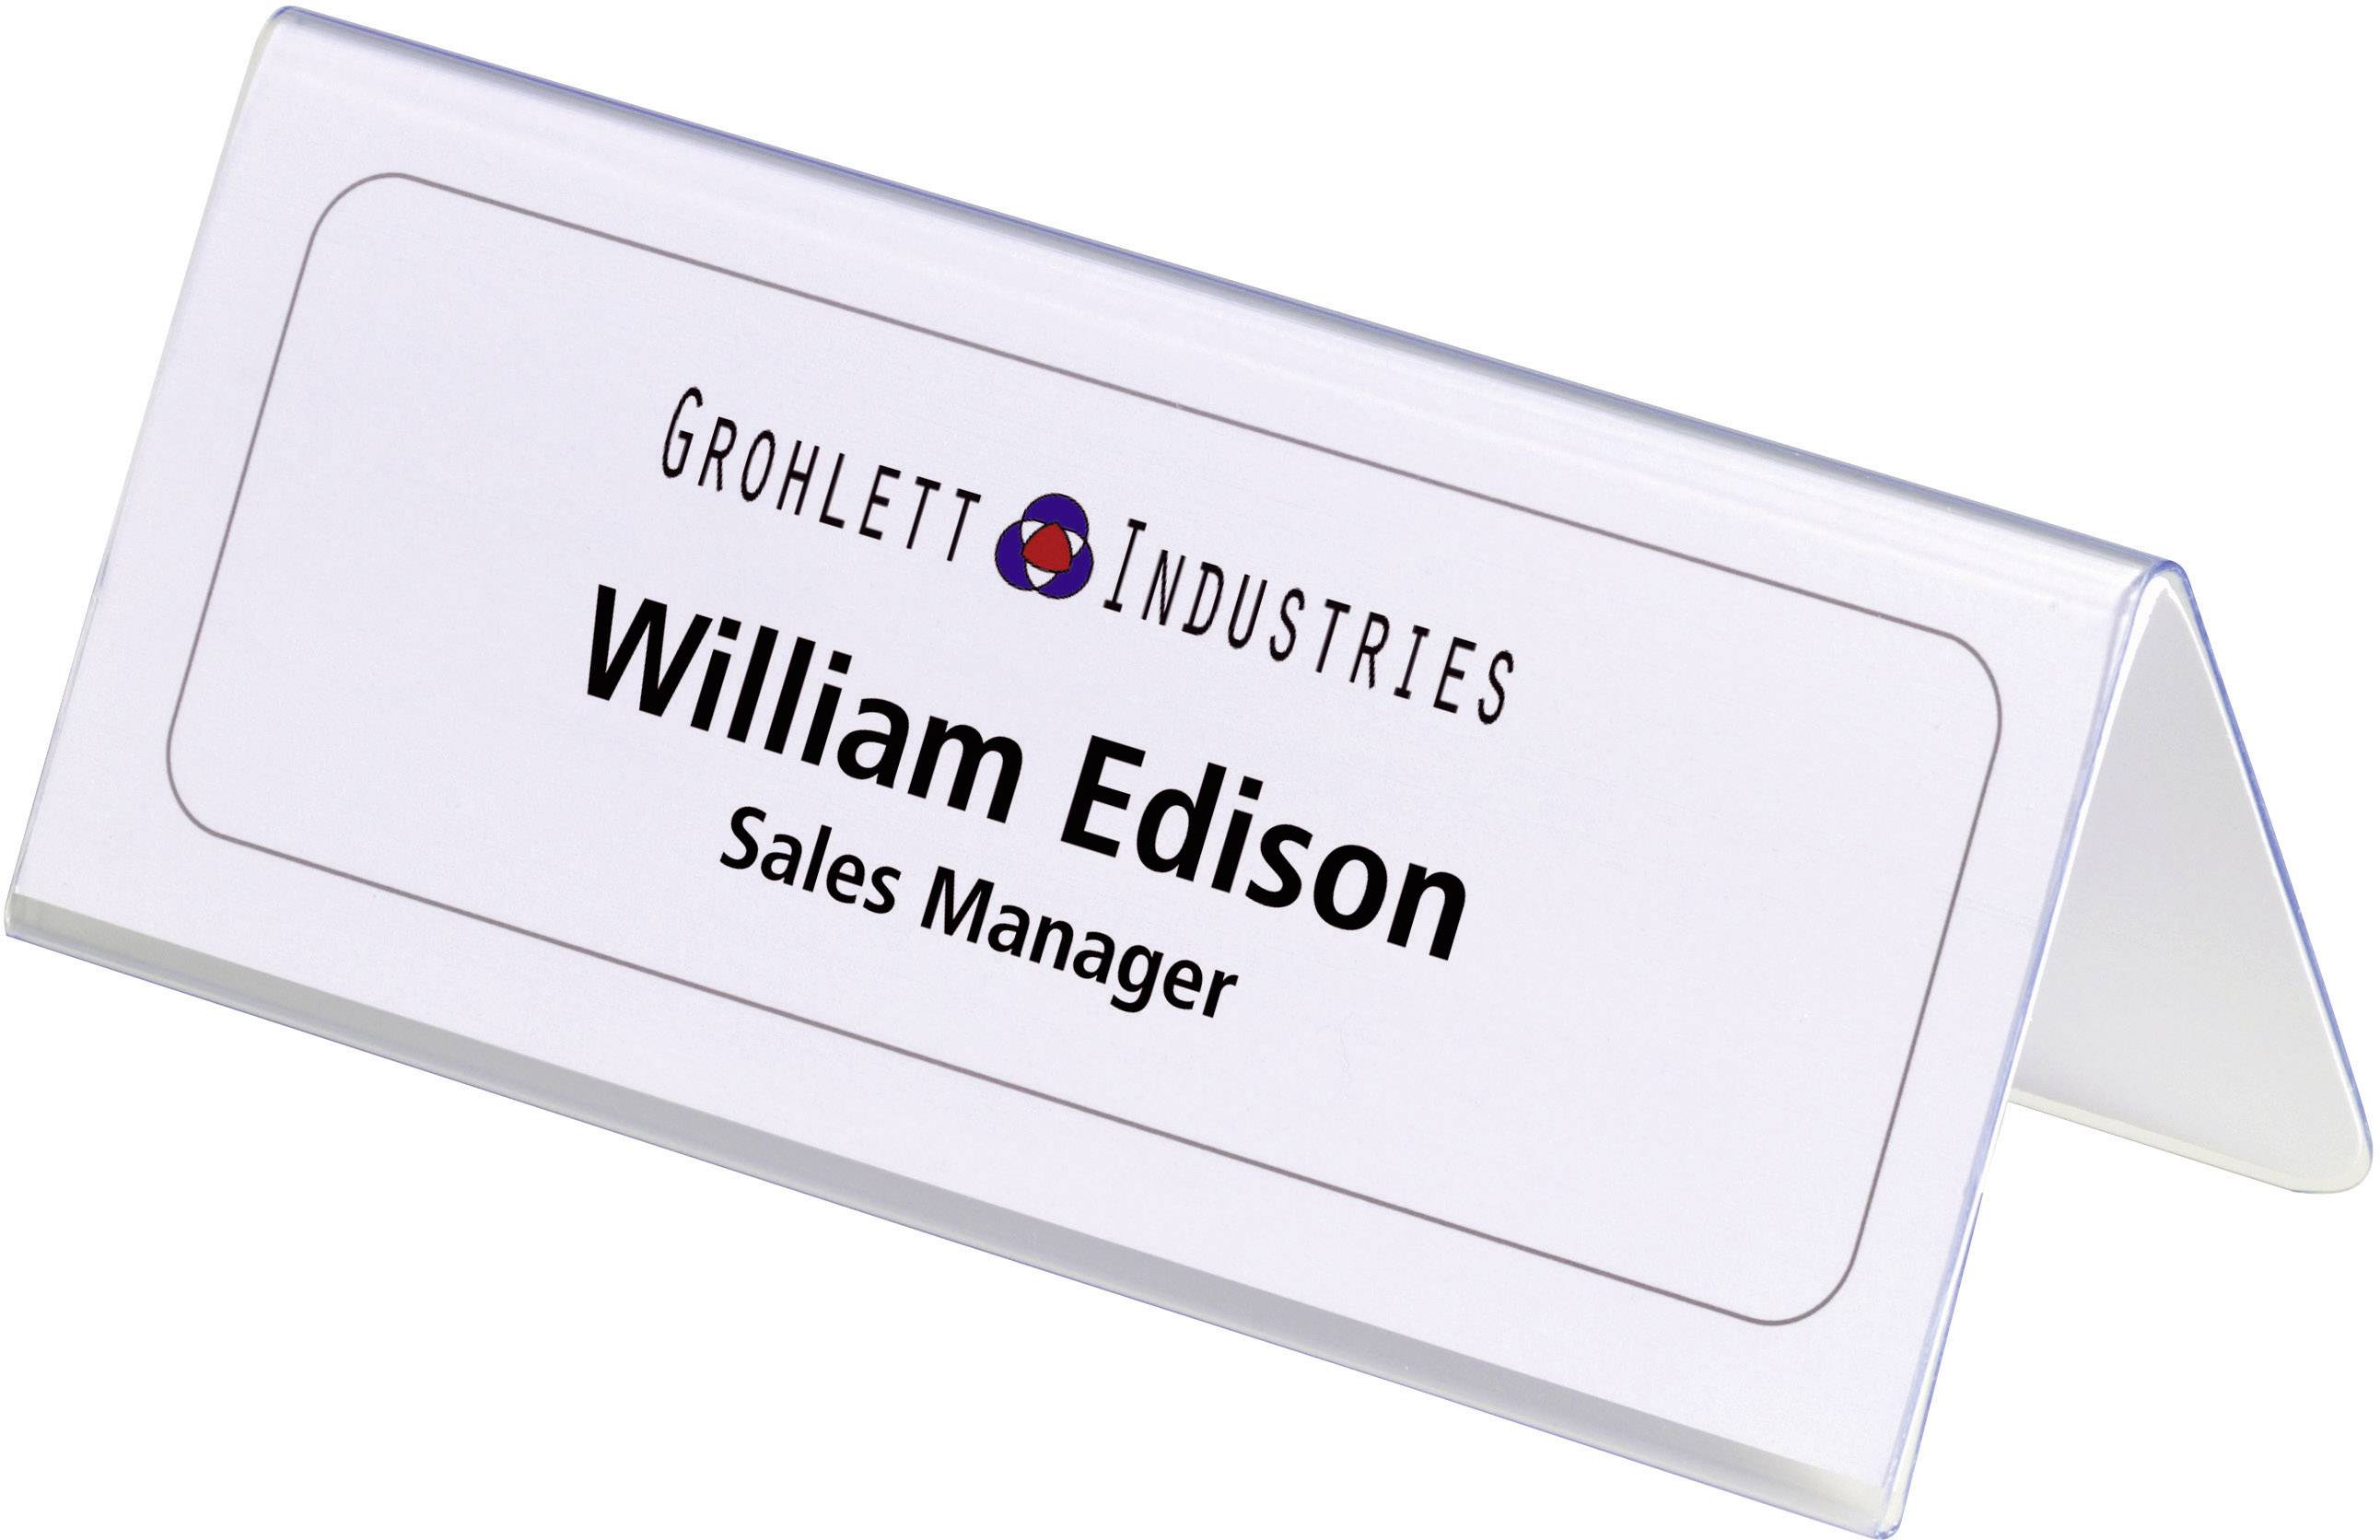 durable-805019-desk-name-plate-paper-size-150-x-61-122-mm-w-x-h